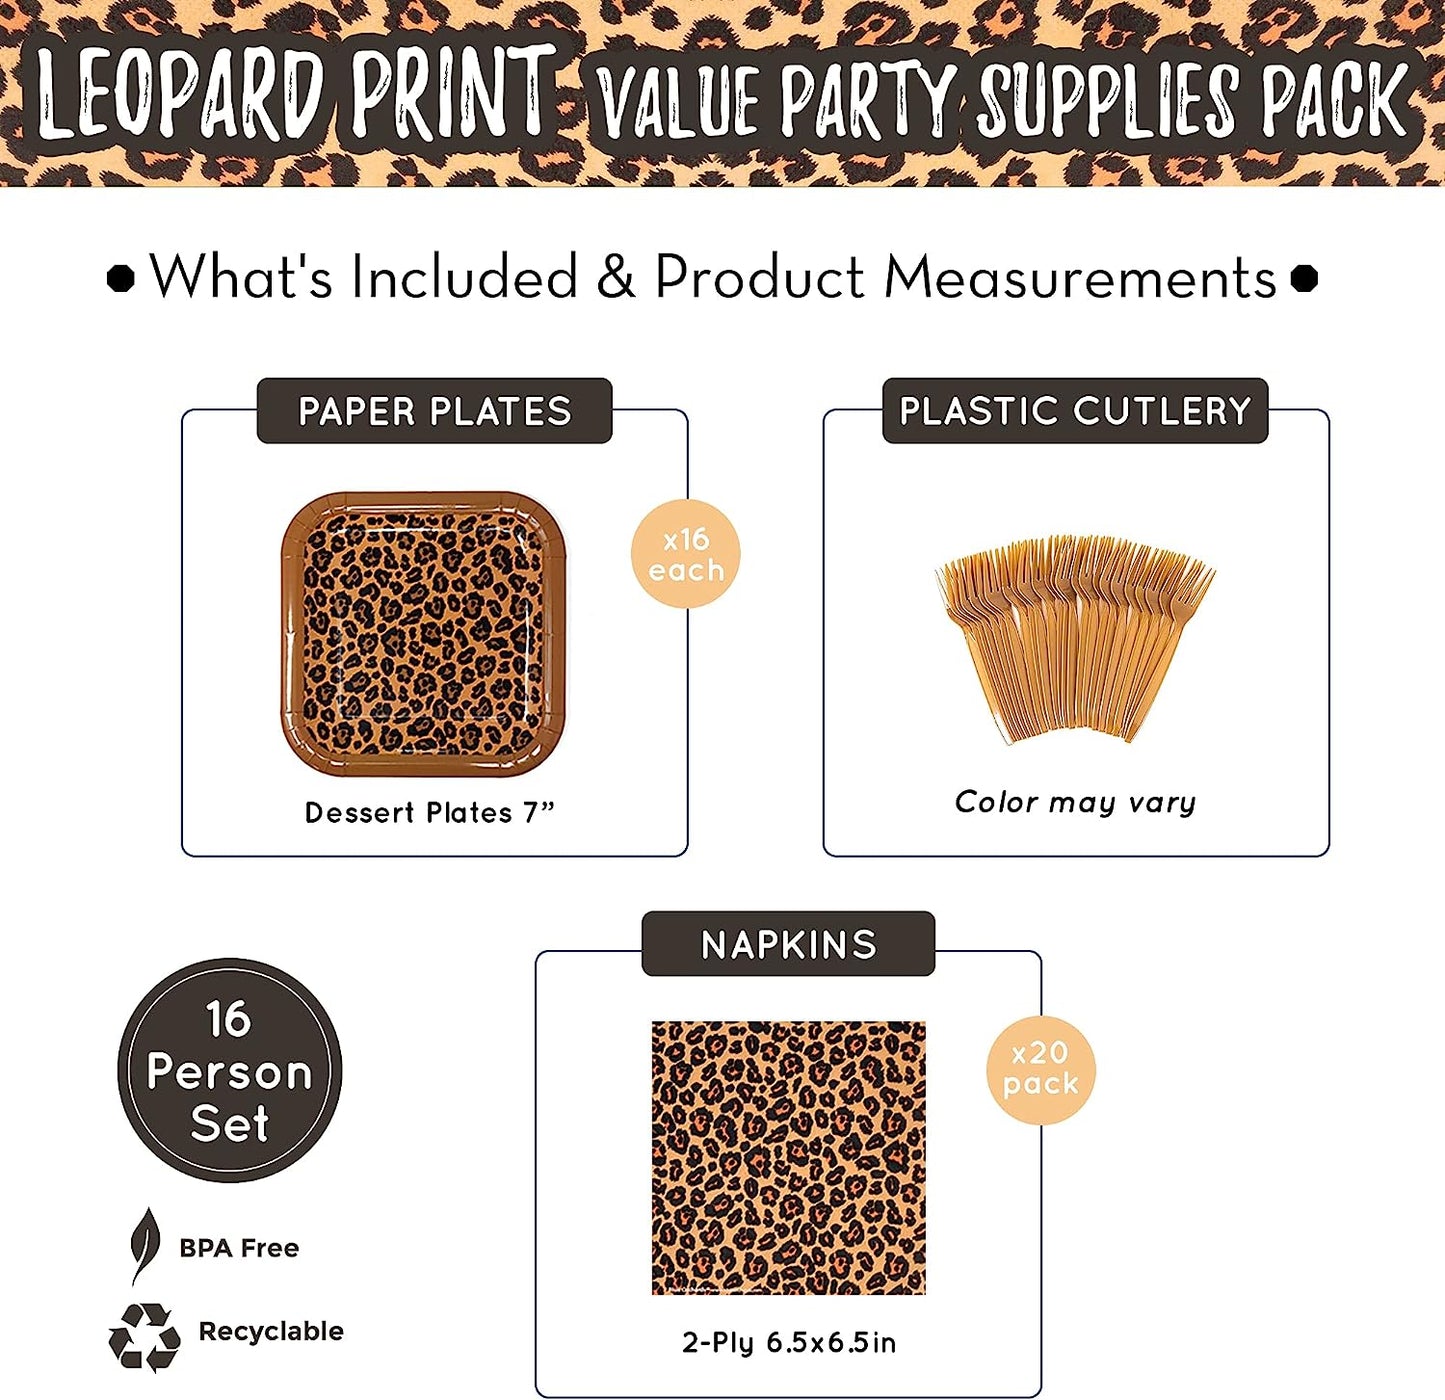 Leopard Print Party Supplies Pack includes 16 7-inch paper dessert plates, 20 paper lunch napkins and plastic forks.